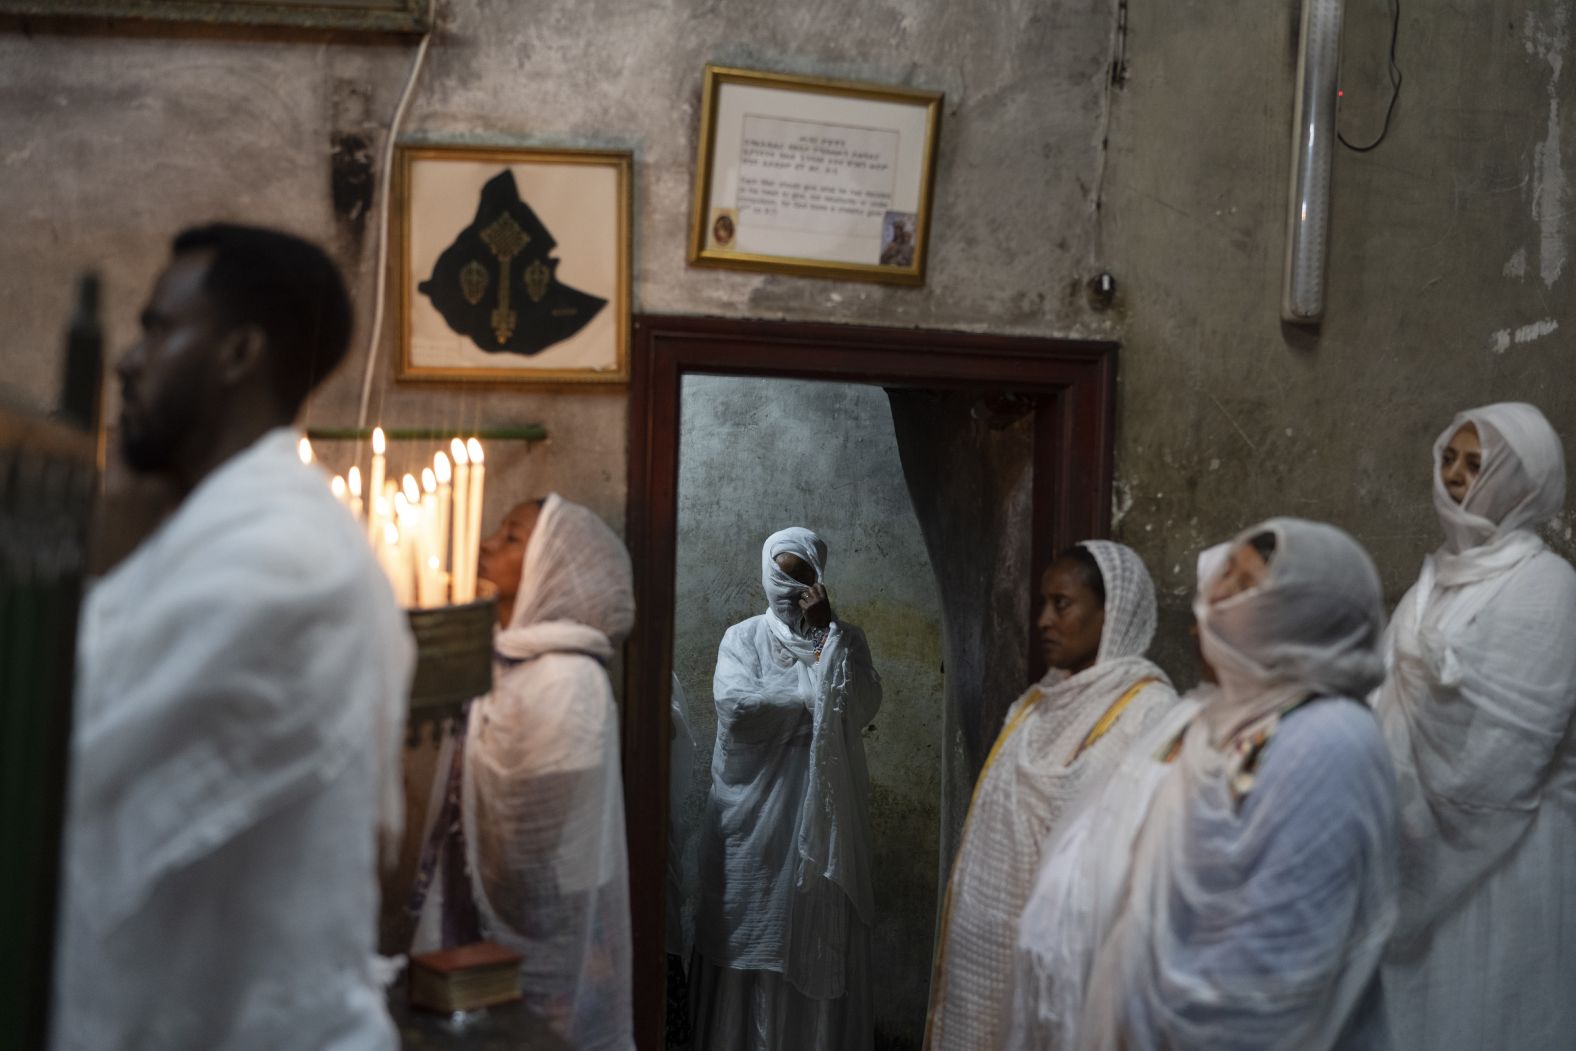 Ethiopian Orthodox Christian worshippers pray during the Washing of the Feet ceremony at the Ethiopian monks' village Deir Al-Sultan, which is on the rooftop of the Church of the Holy Sepulchre in Jerusalem's Old City, on Thursday, May 2.